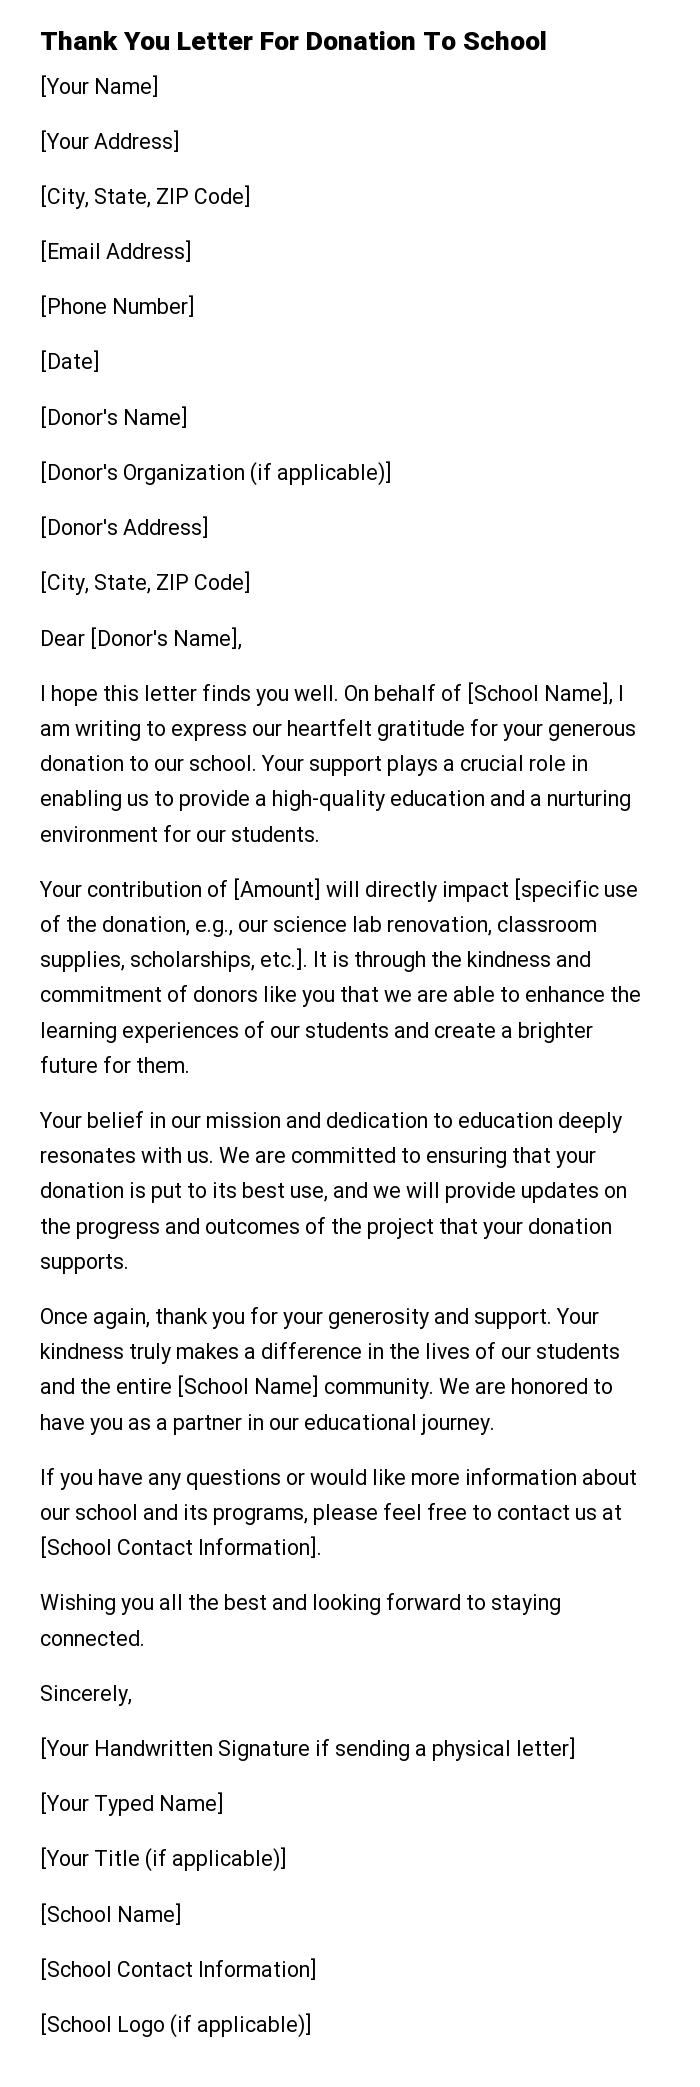 Thank You Letter For Donation To School